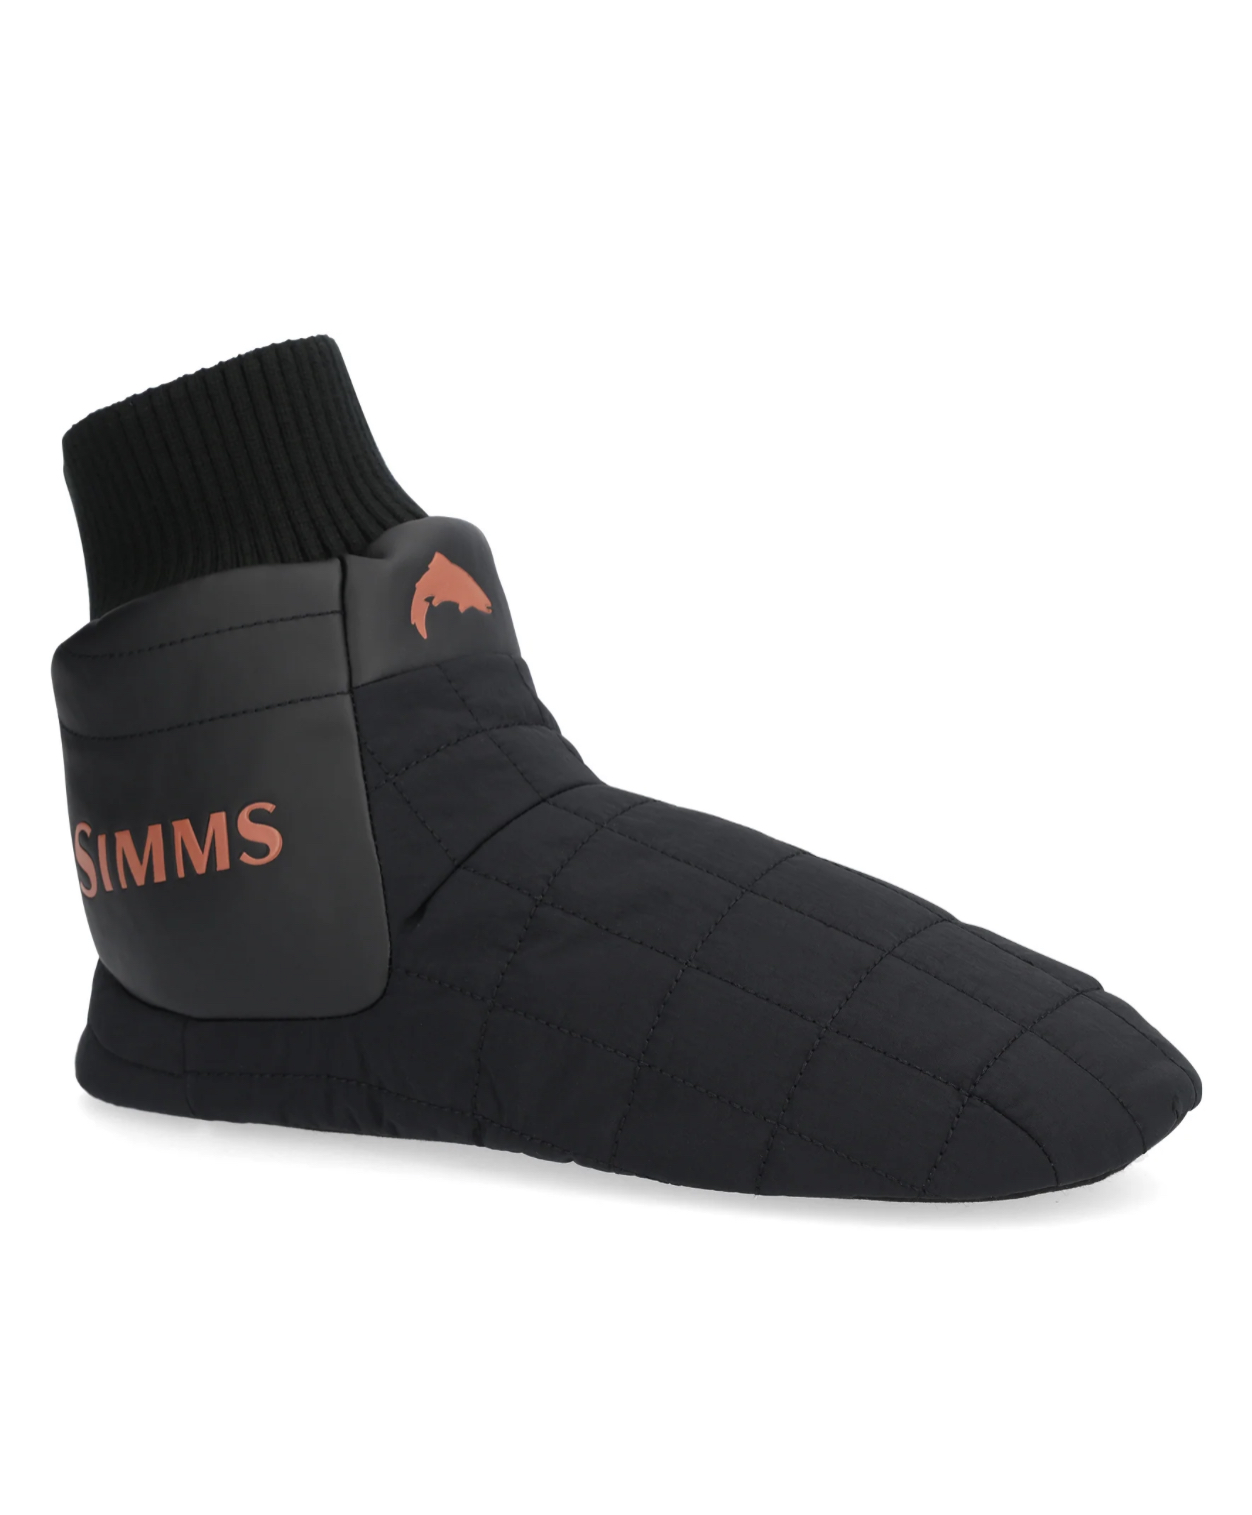 Simms Bulkley Insulated Bootie - XL